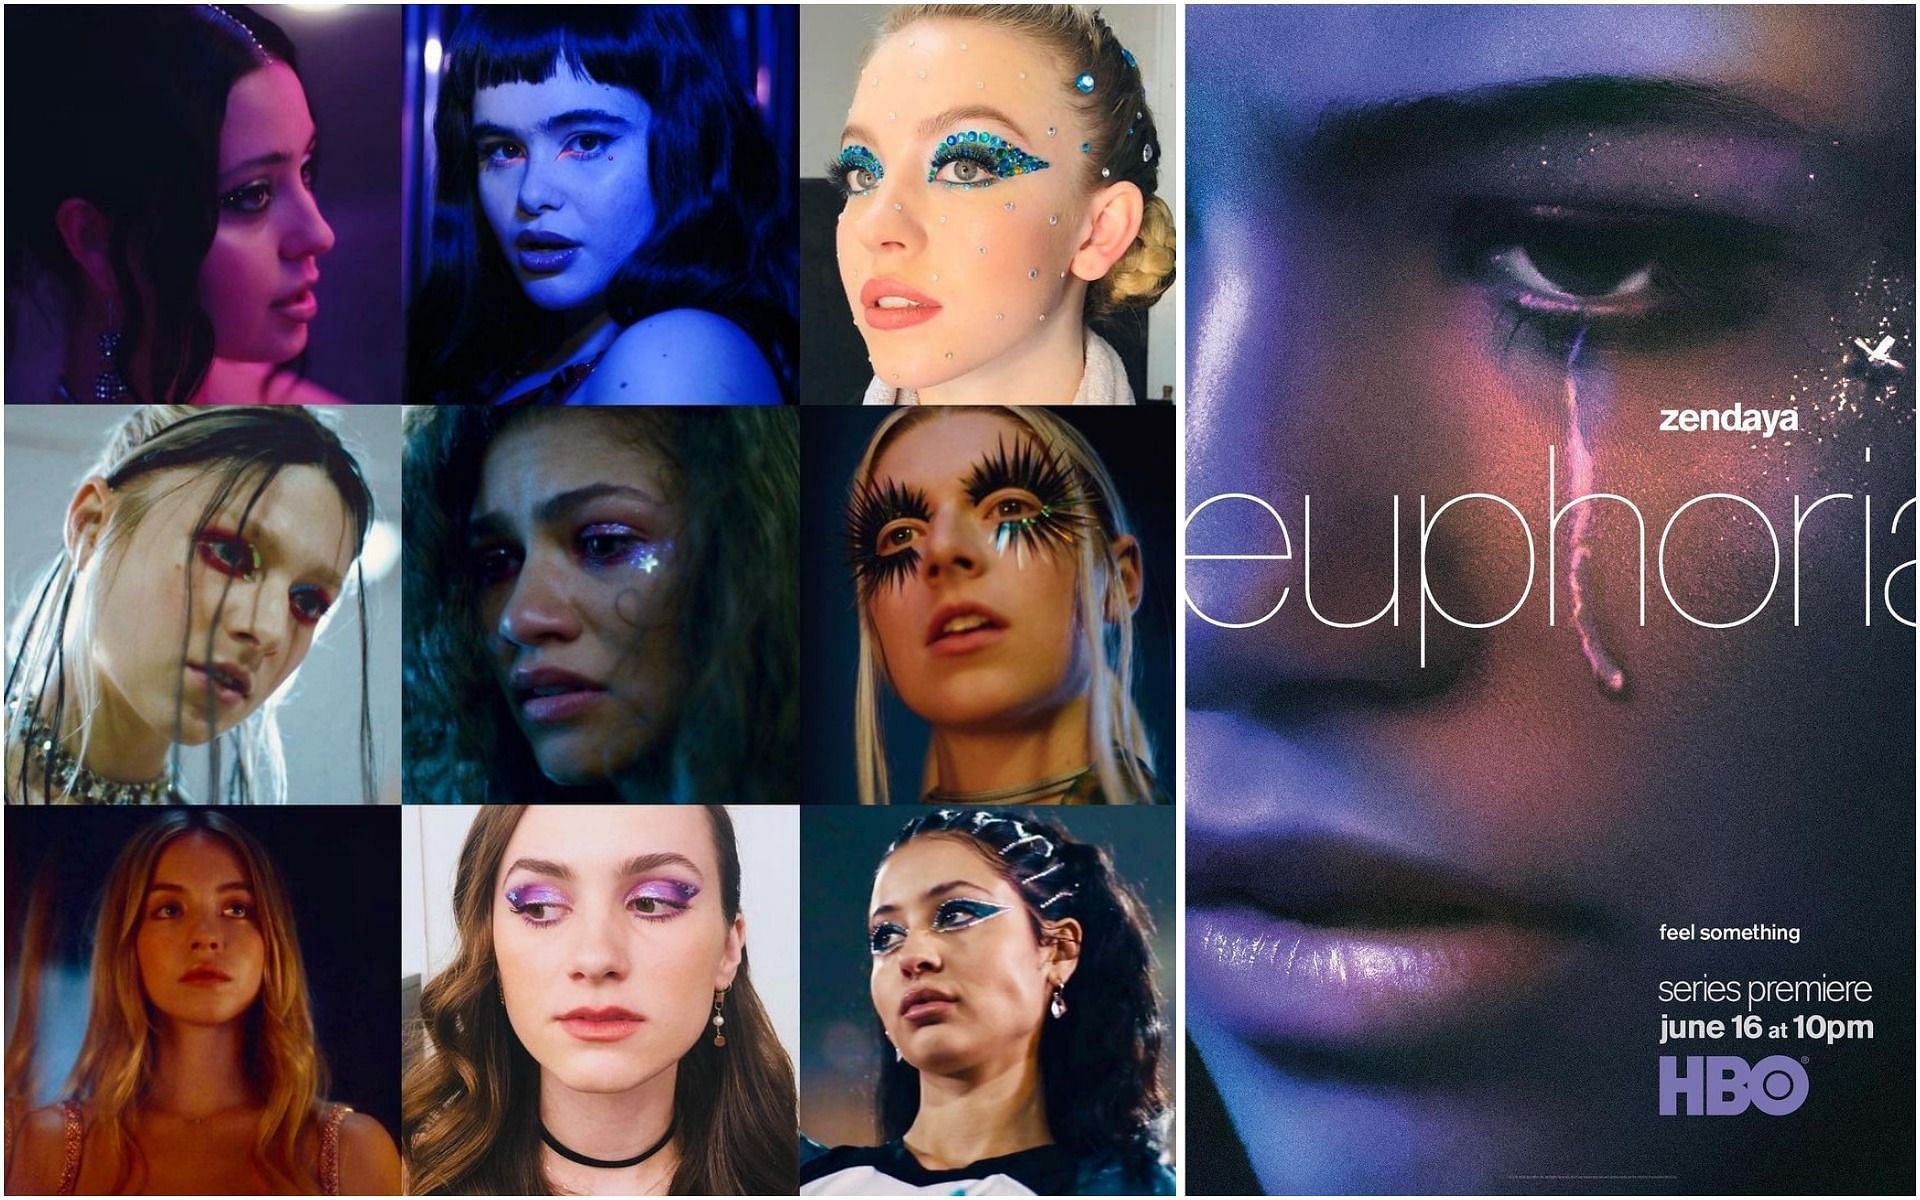 Some of the makeup looks from &#039;Euphoria&#039; (Image via Euphoria and donni.davy/Instagram)